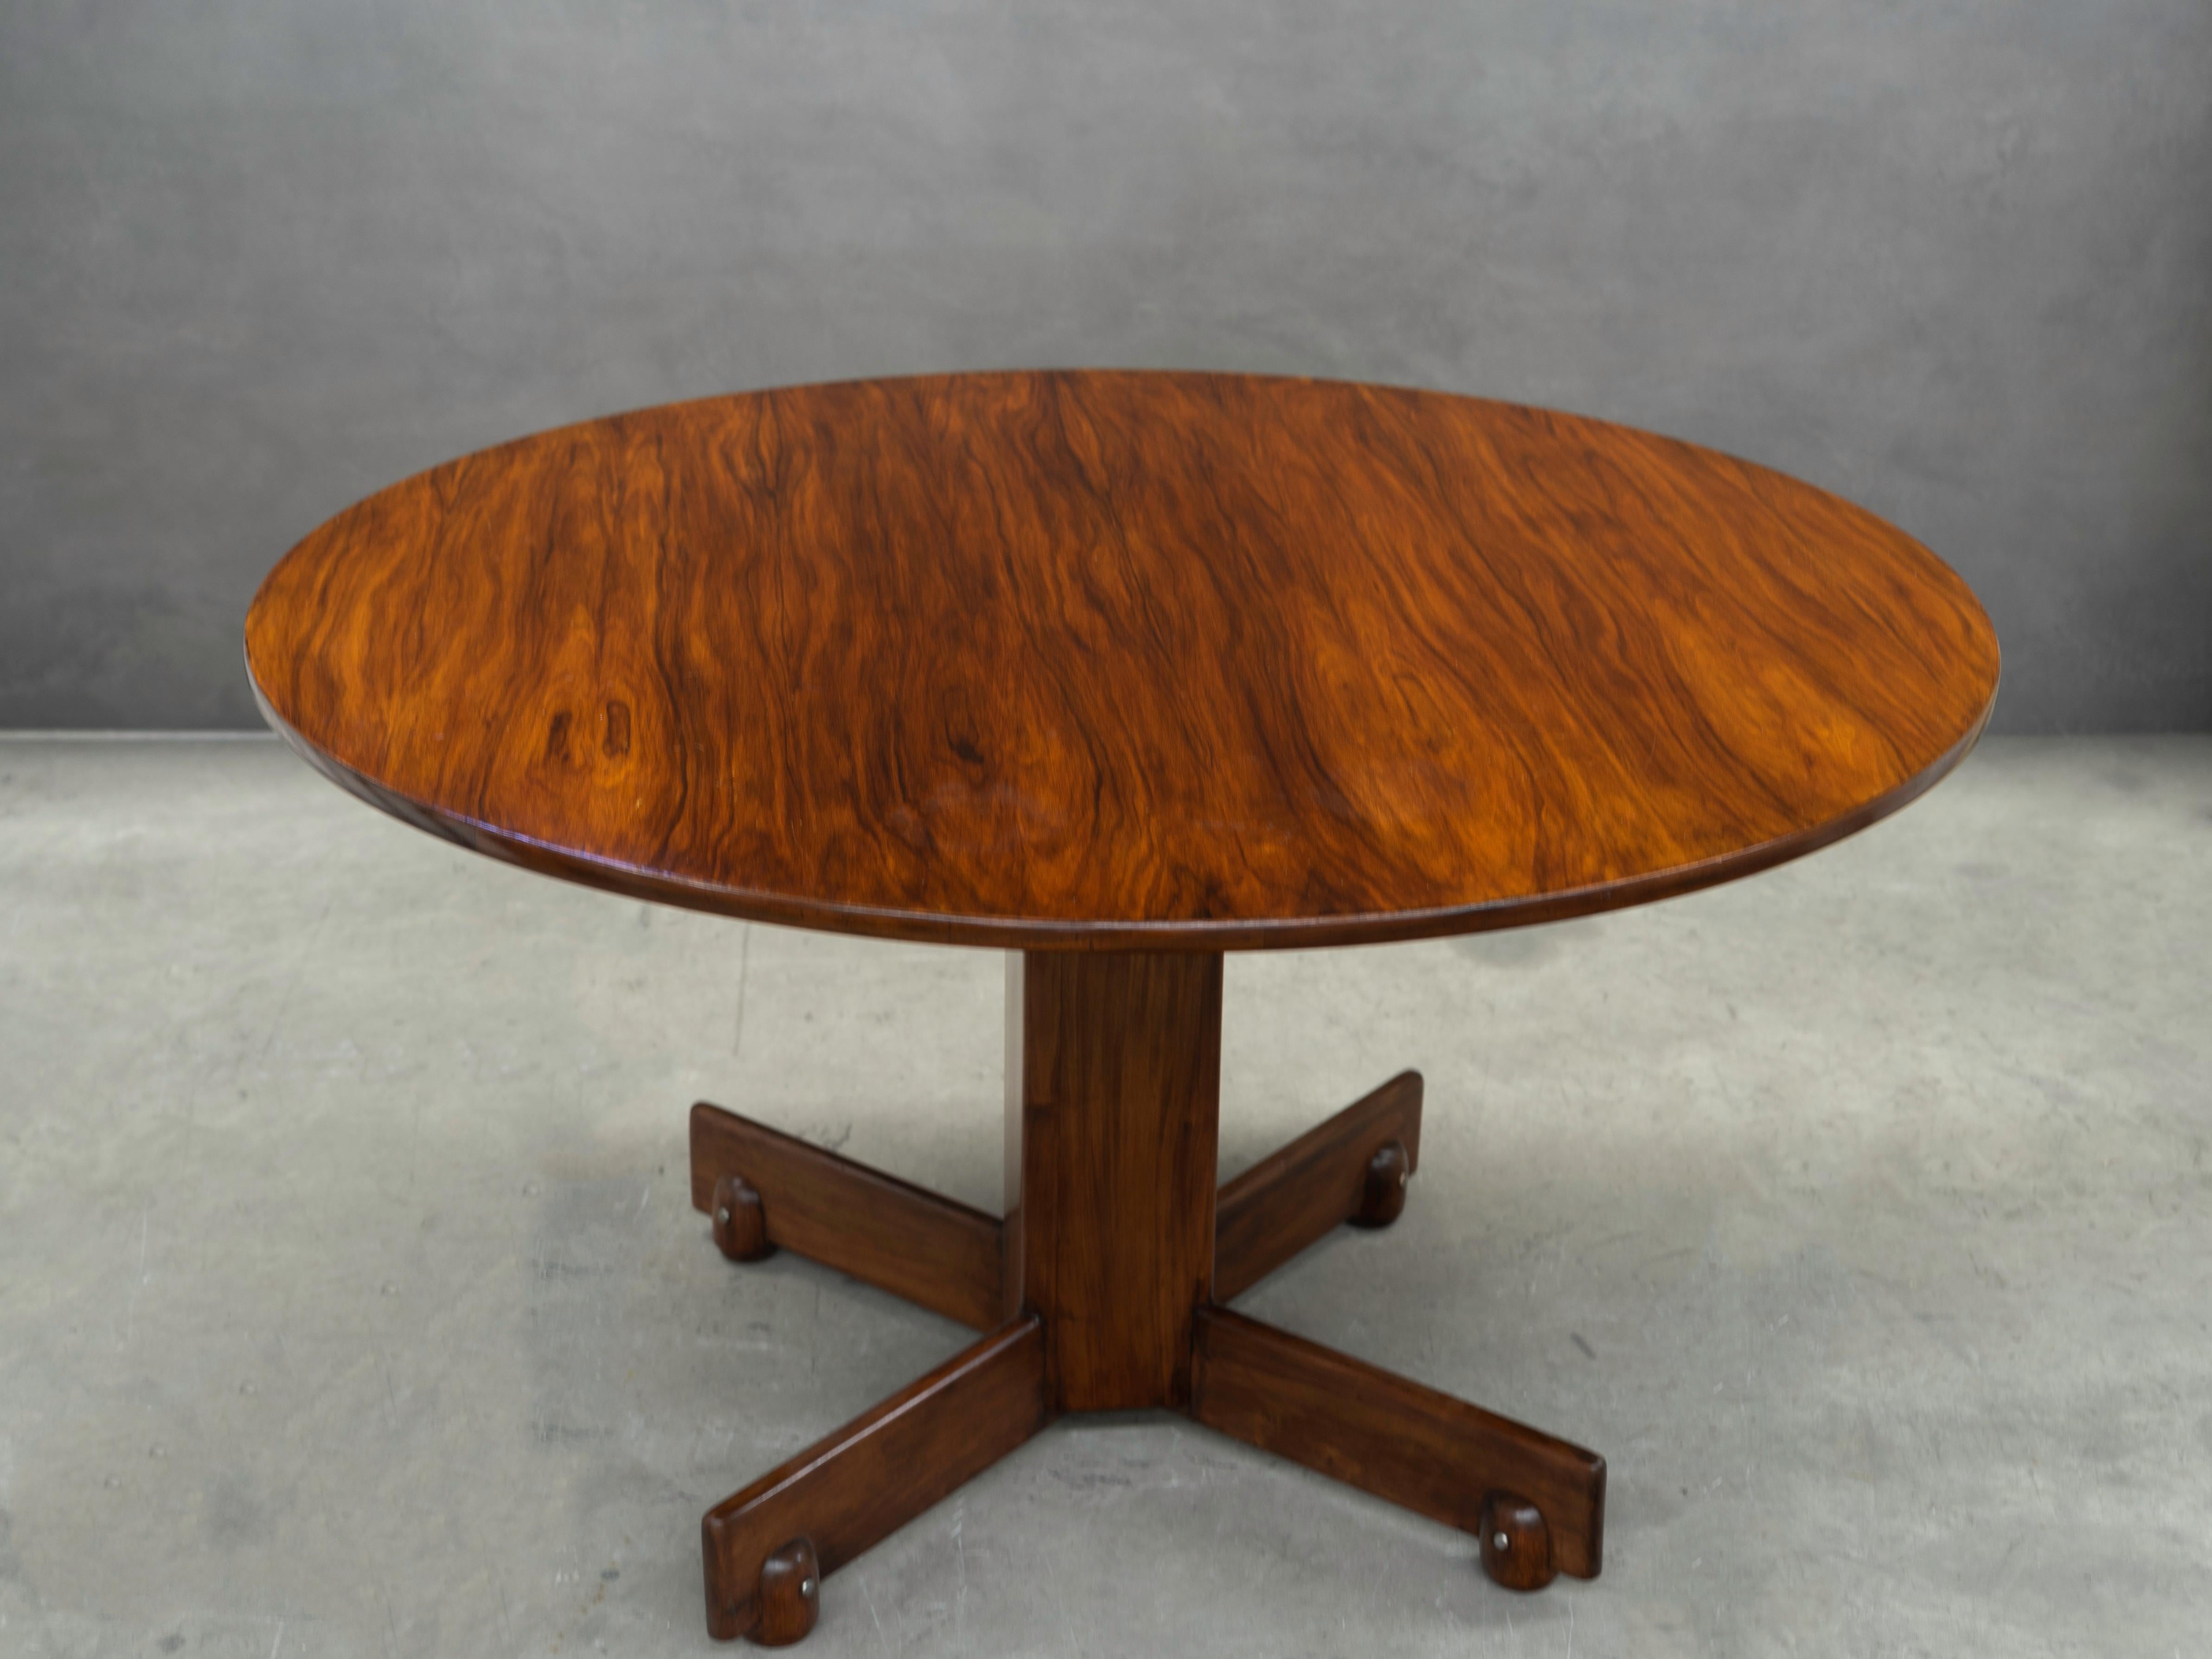 Designed in 1960 by Sergio Rodrigues, this modern dining table is made of Rosewood (Jacaranda).

Created by Sergio Rodrigues in 1960, the round dining table, named as 